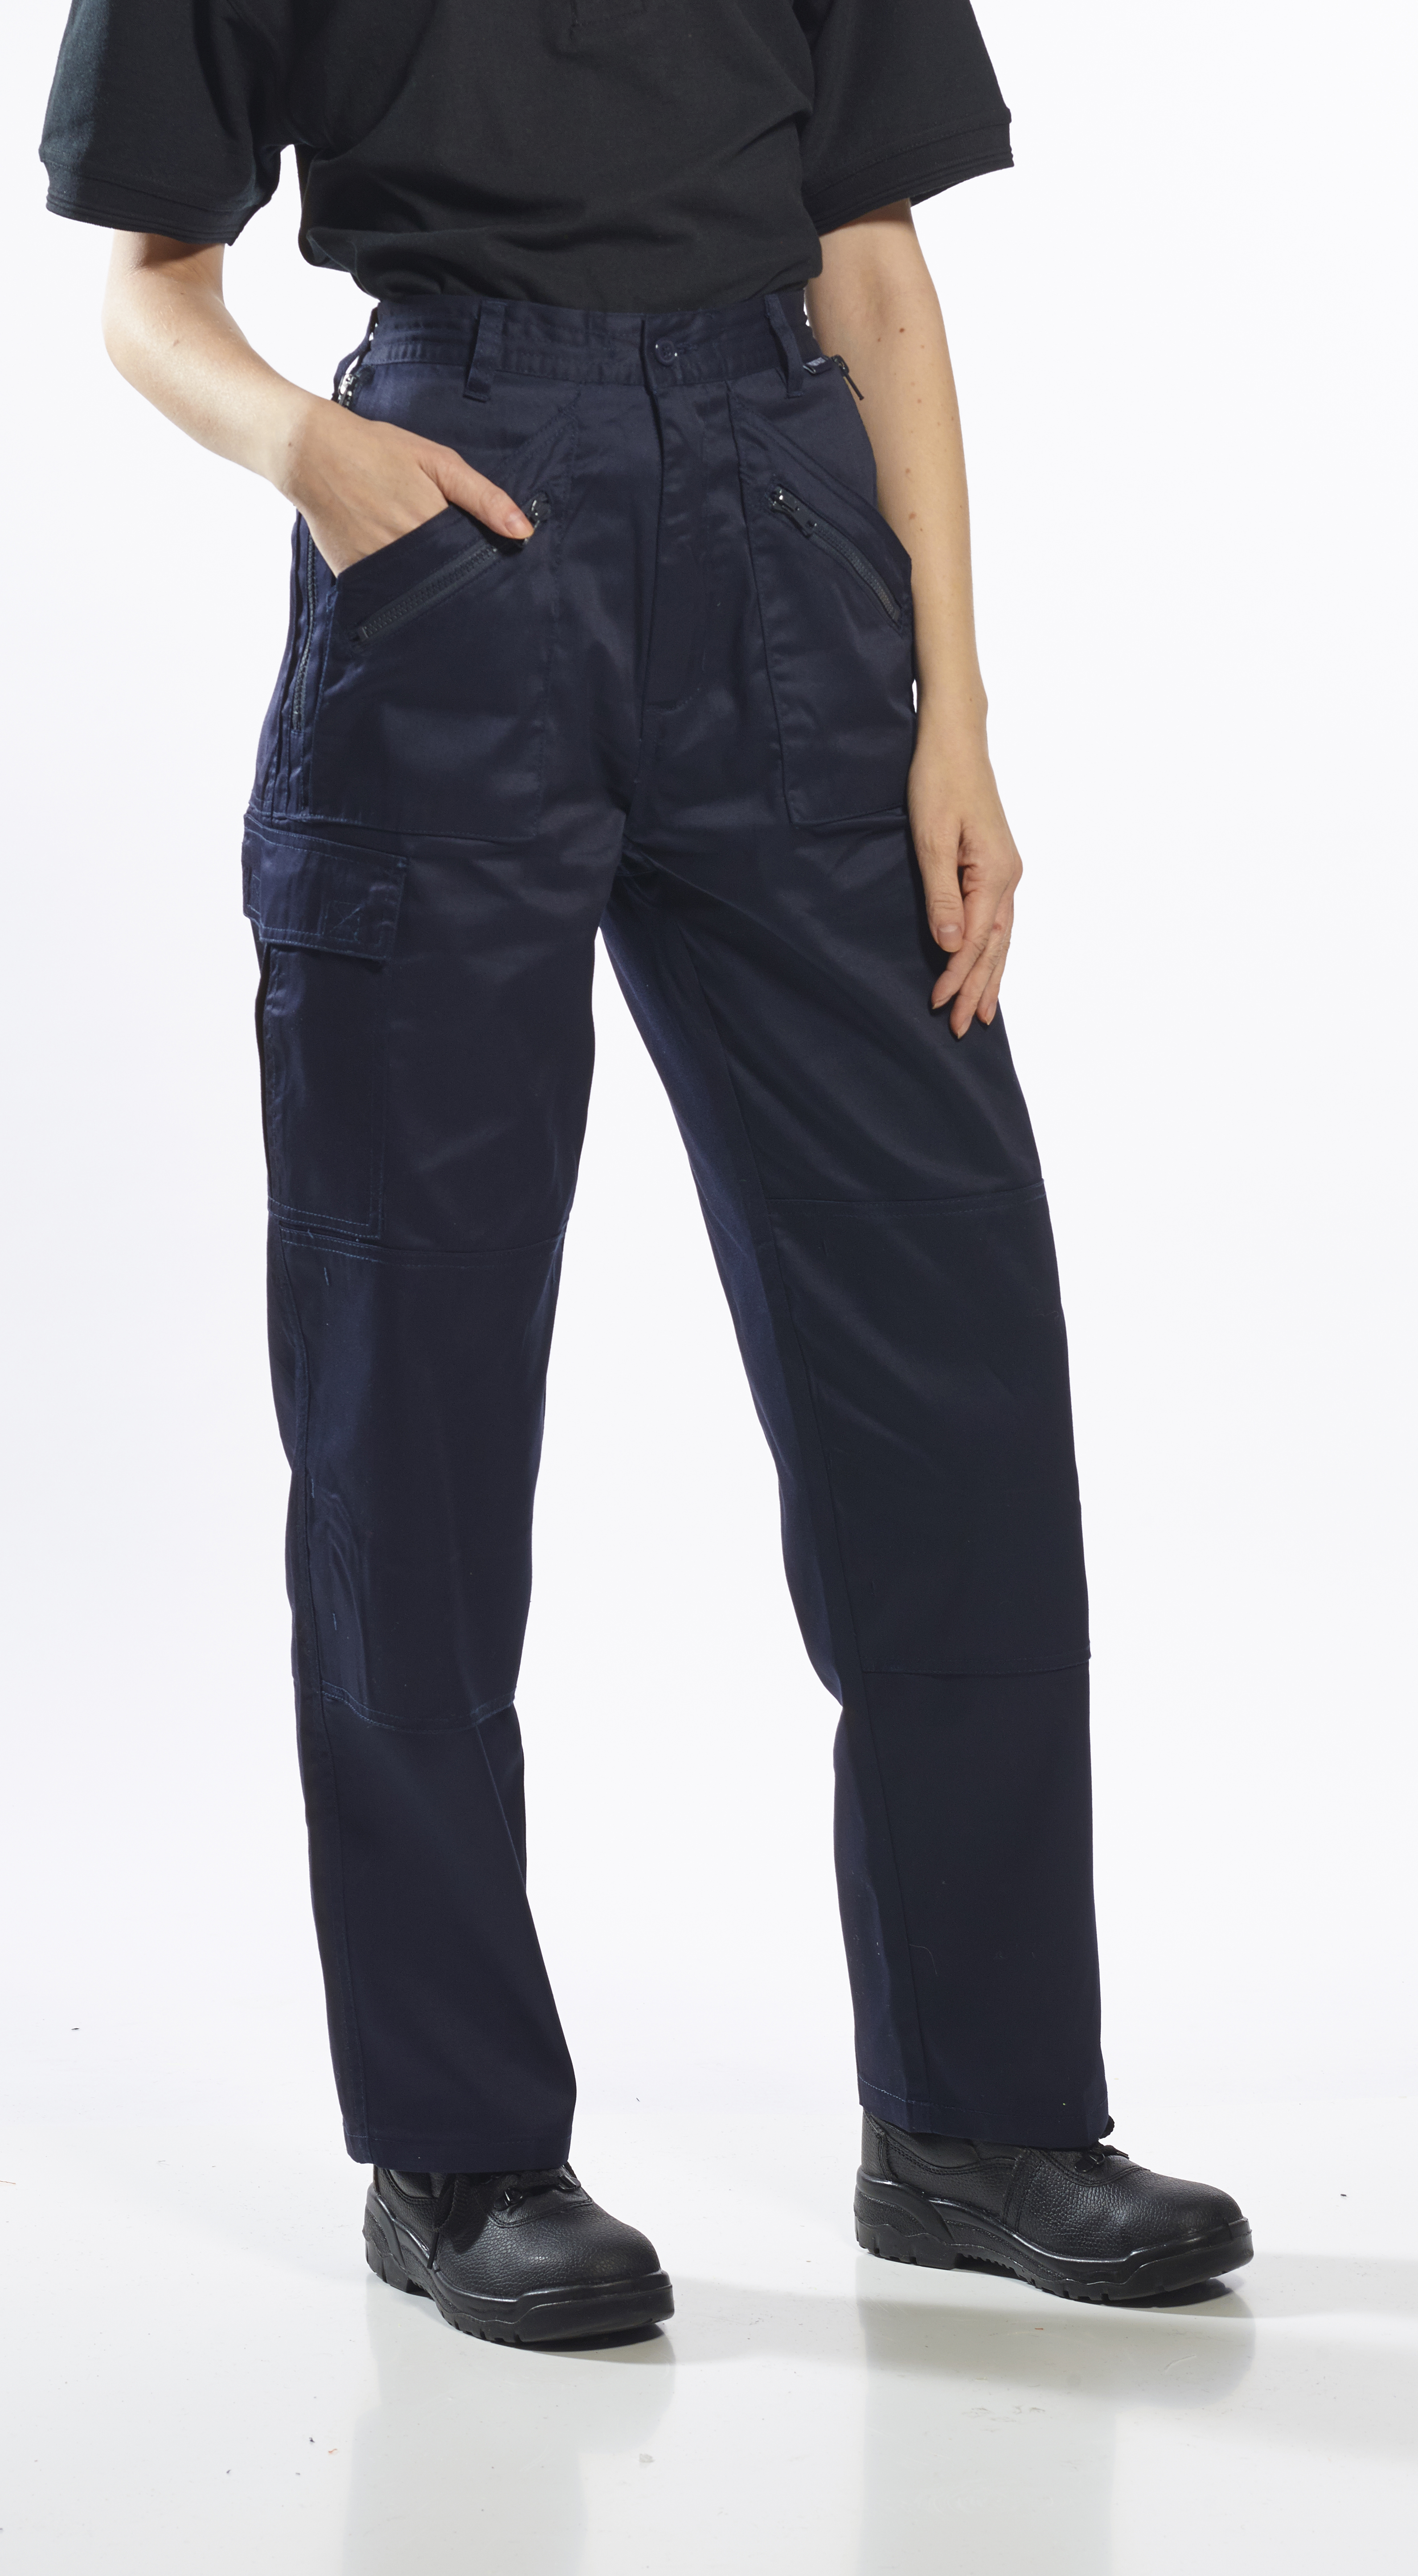 Worker, work trousers white cotton / polyester 60/40 - Chick-a-dees